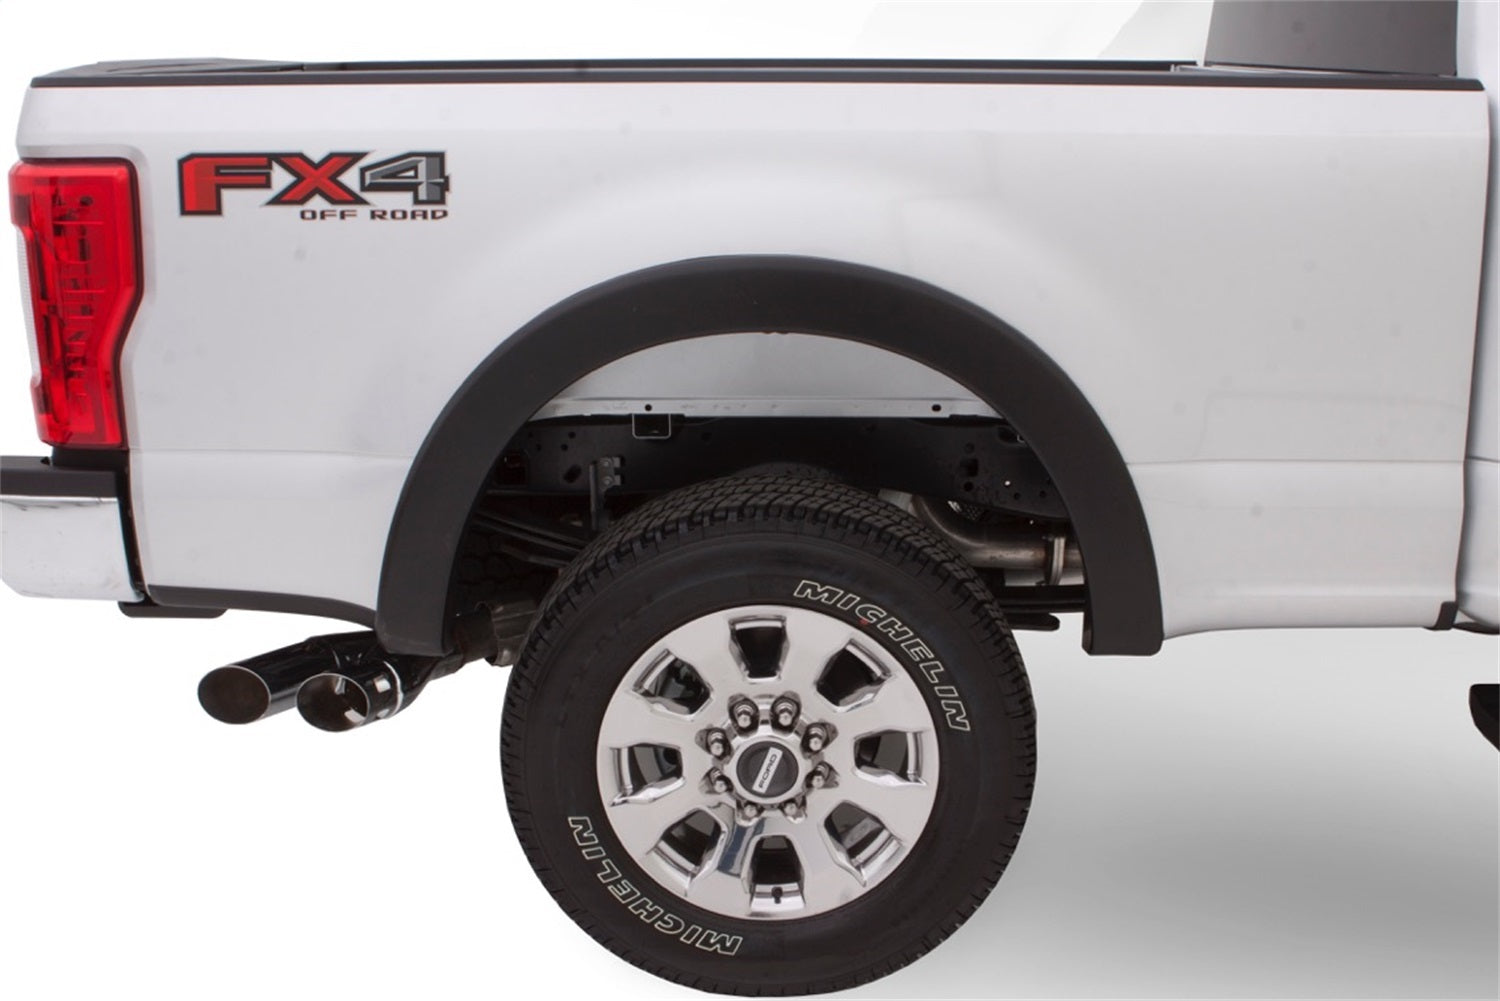 Bushwacker 20040-02 Black OE-Style Smooth Finish Rear Fender Flares for 1999-2010 Ford F-250 Super Duty, F-350 Super Duty (Excludes Dually)